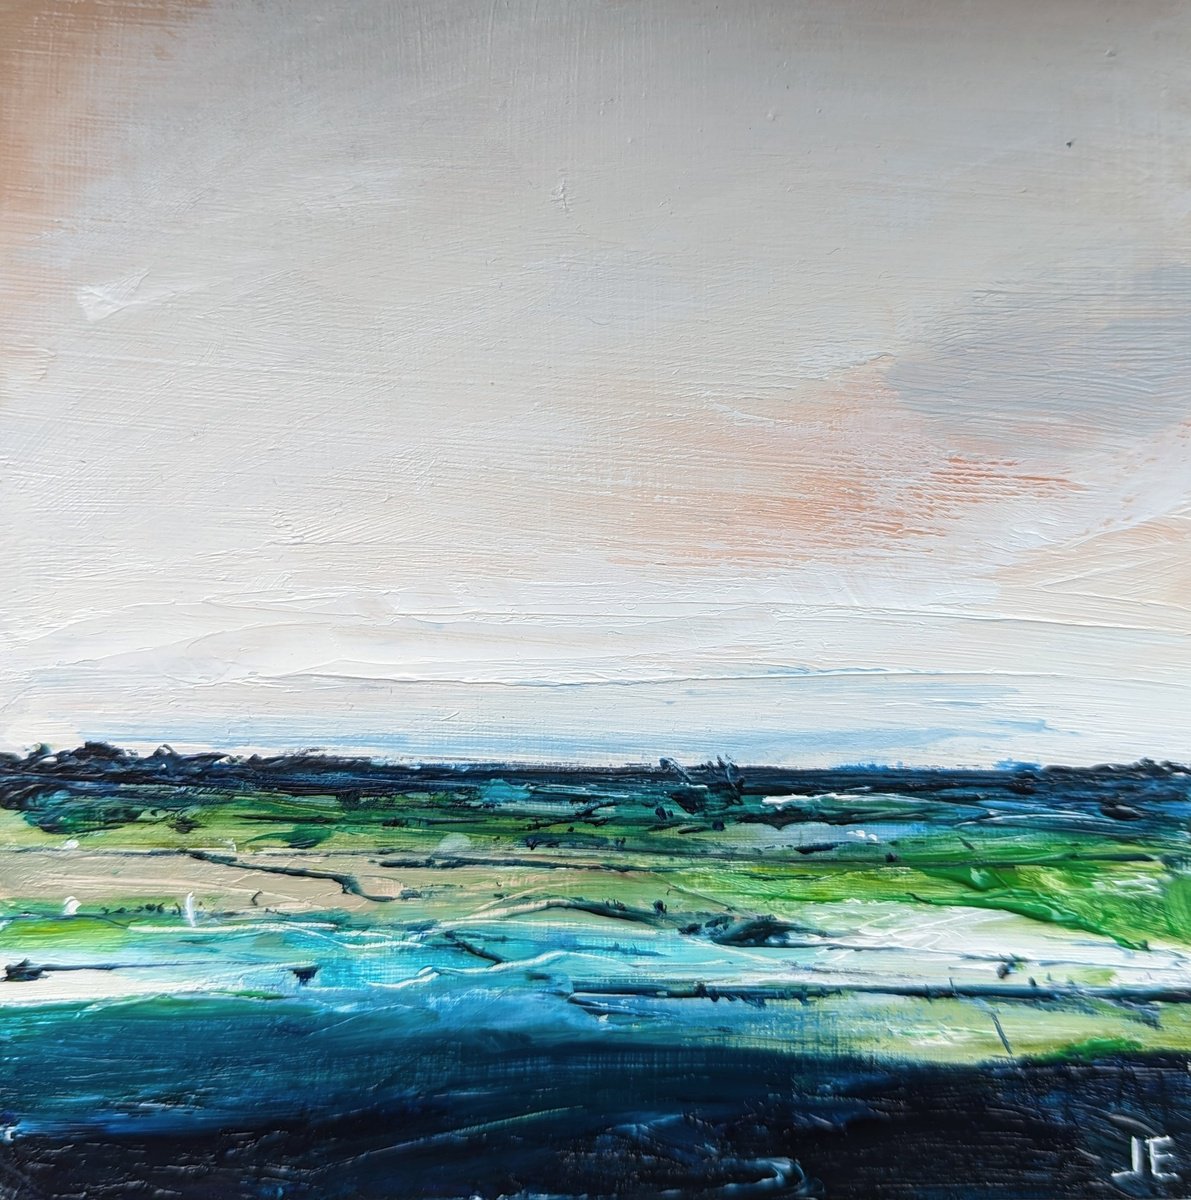 Miniature Abstract Chilterns Landscape #7 by Jo Earl